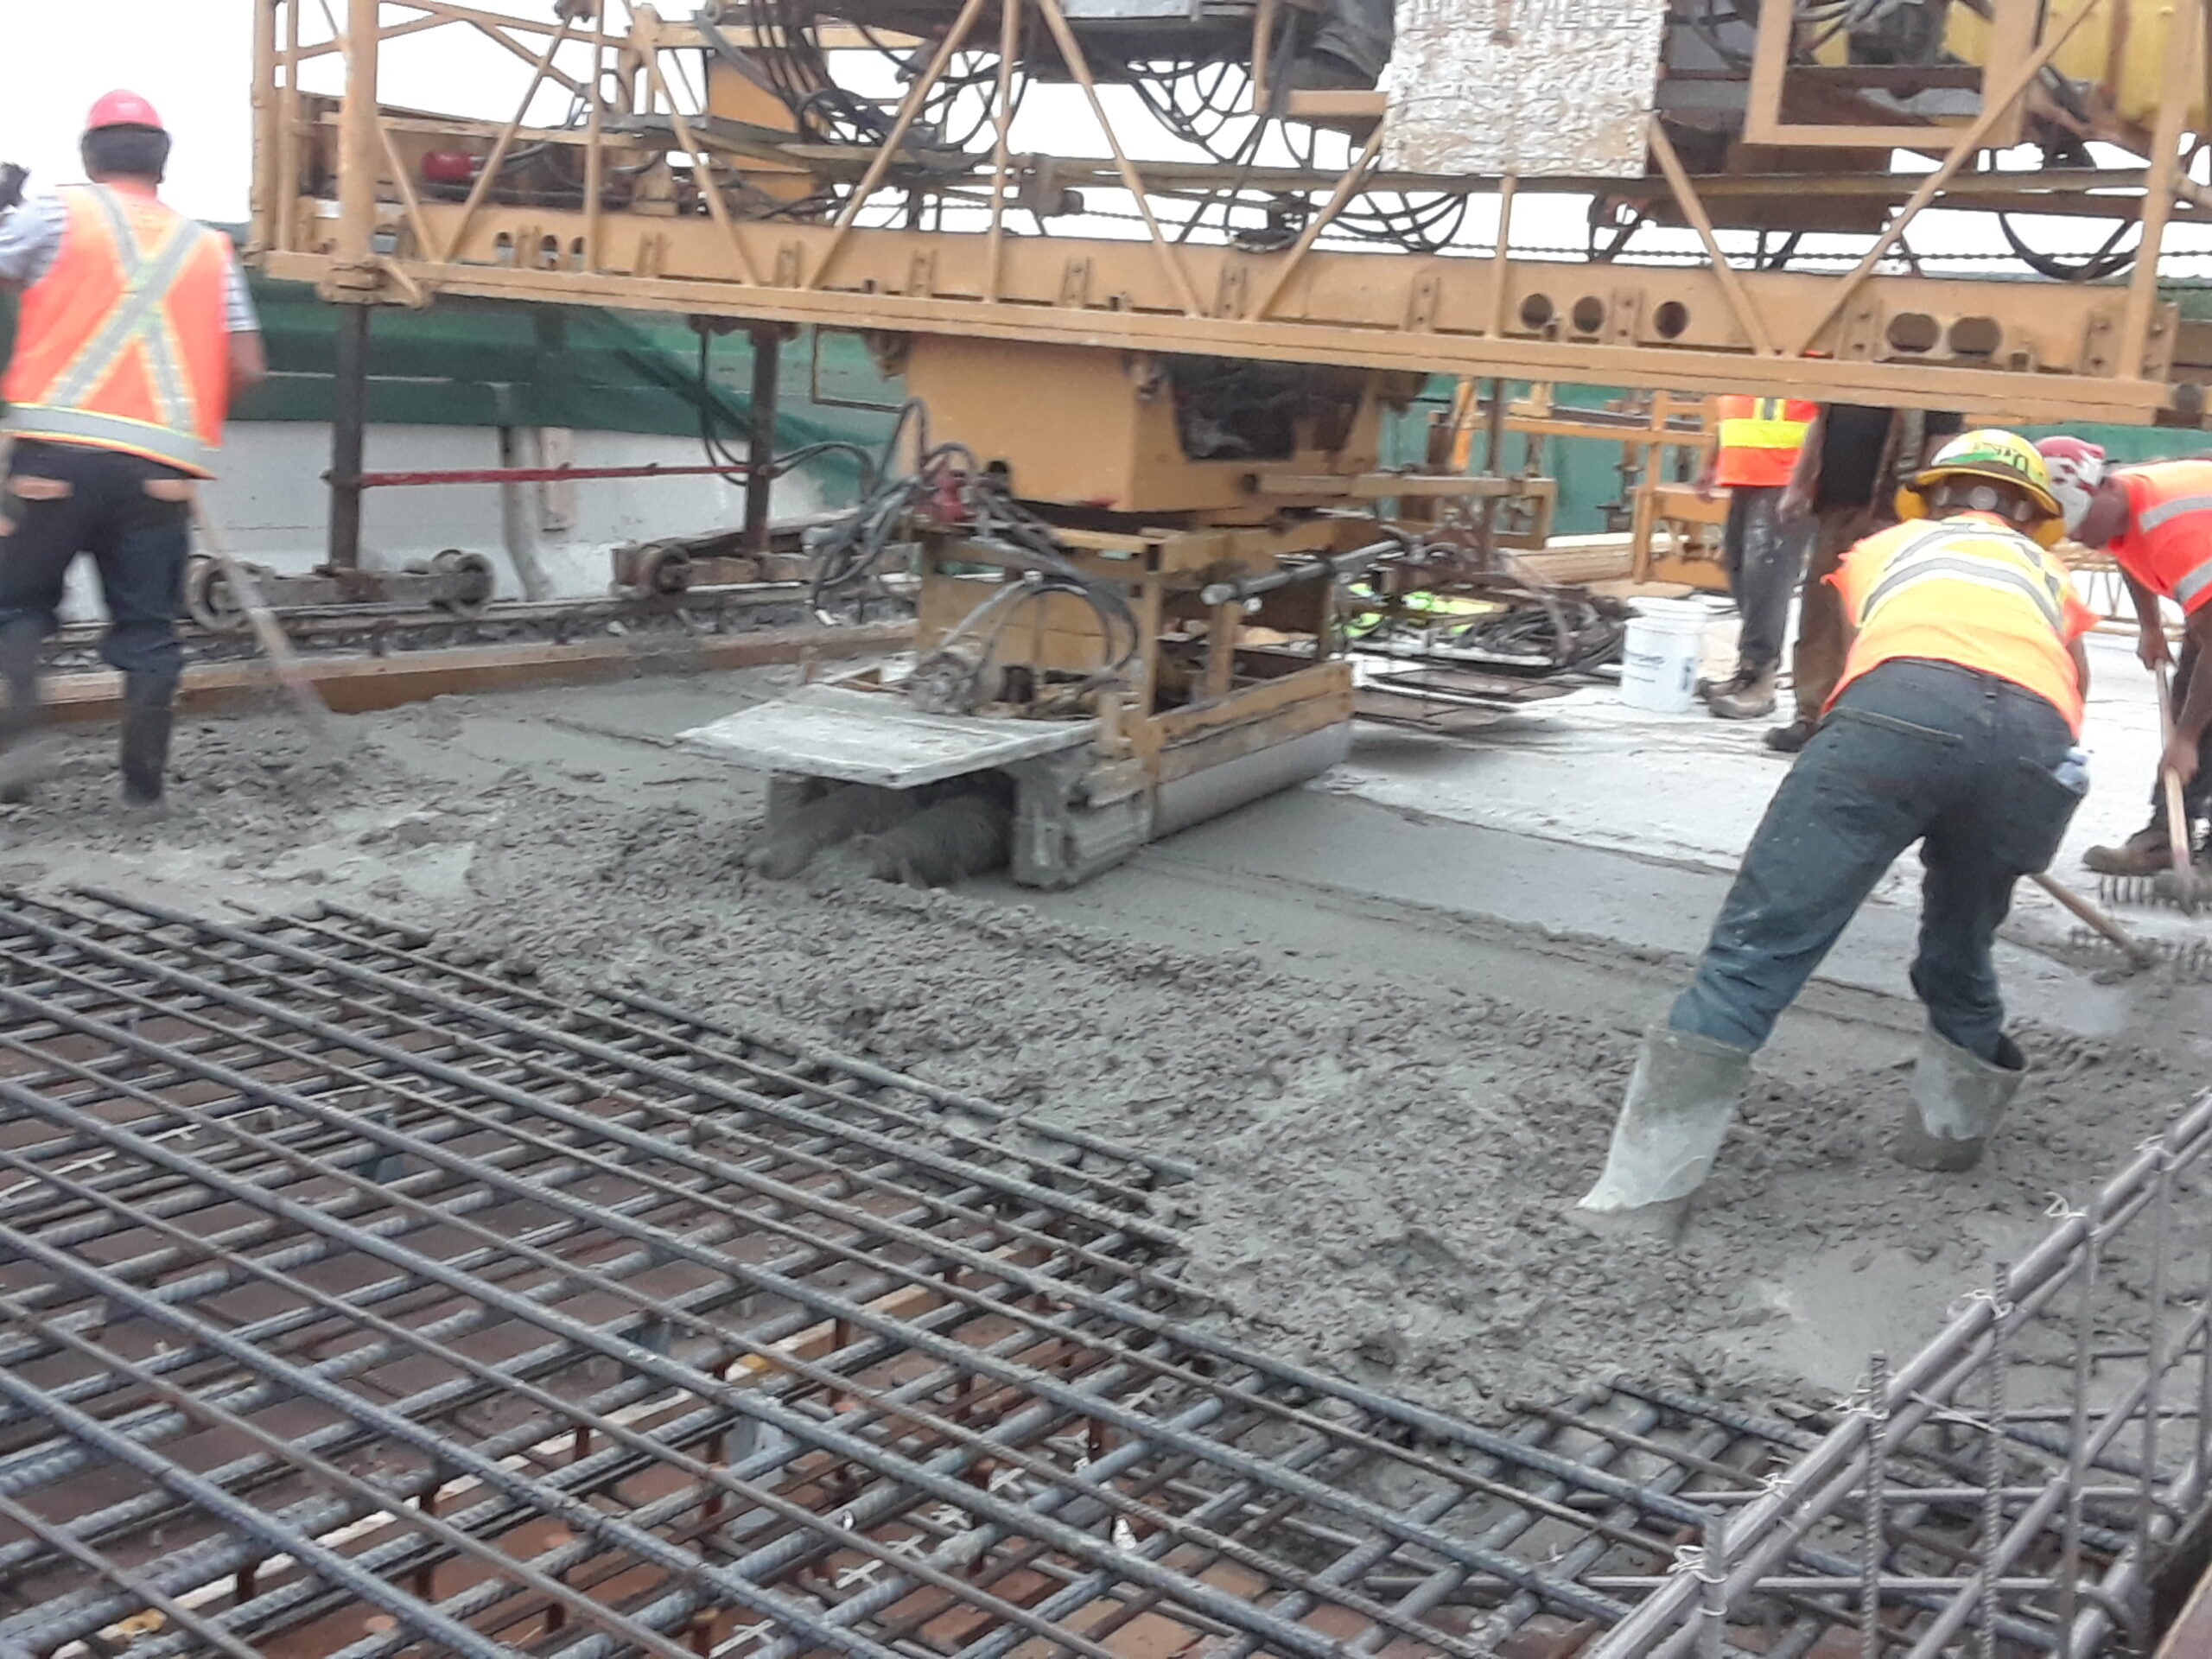 Newly placed concrete being vibrated and spread